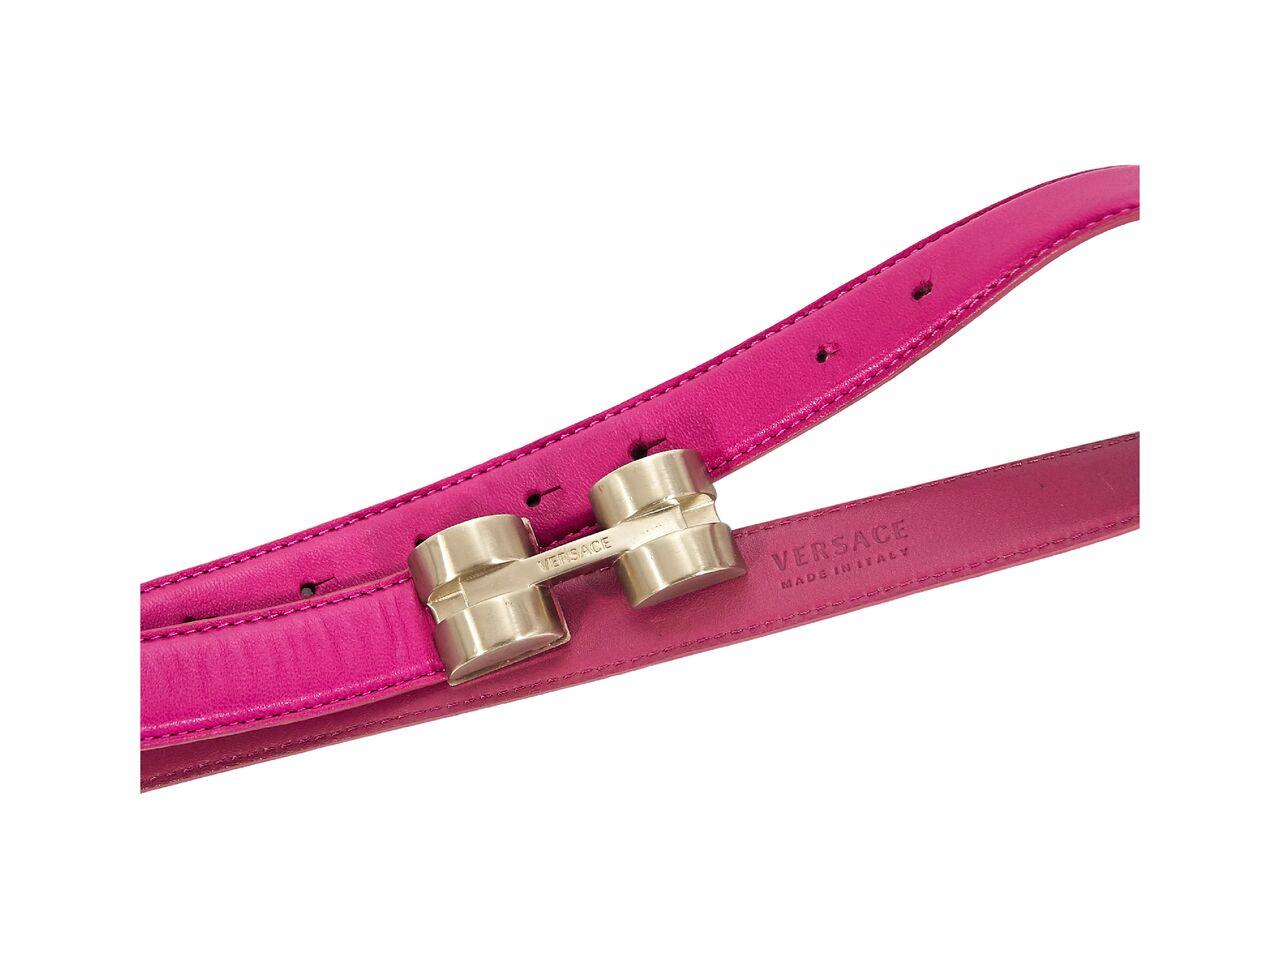 Product details:  Hot pink leather belt by Versace.  Adjustable brass buckle closure.  38.5